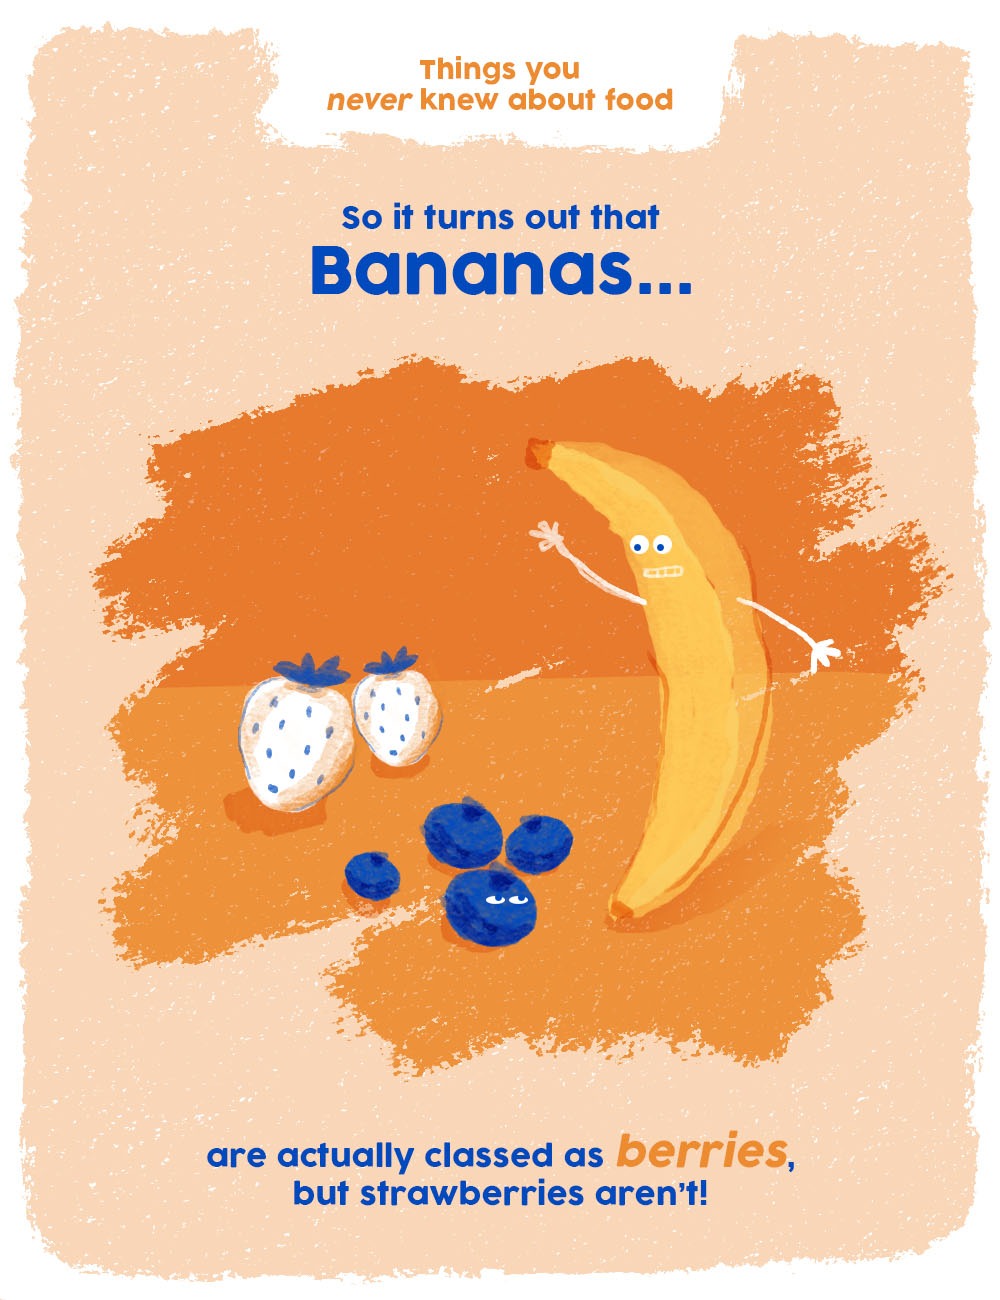 things you never knew about food graphics - bananas are berries